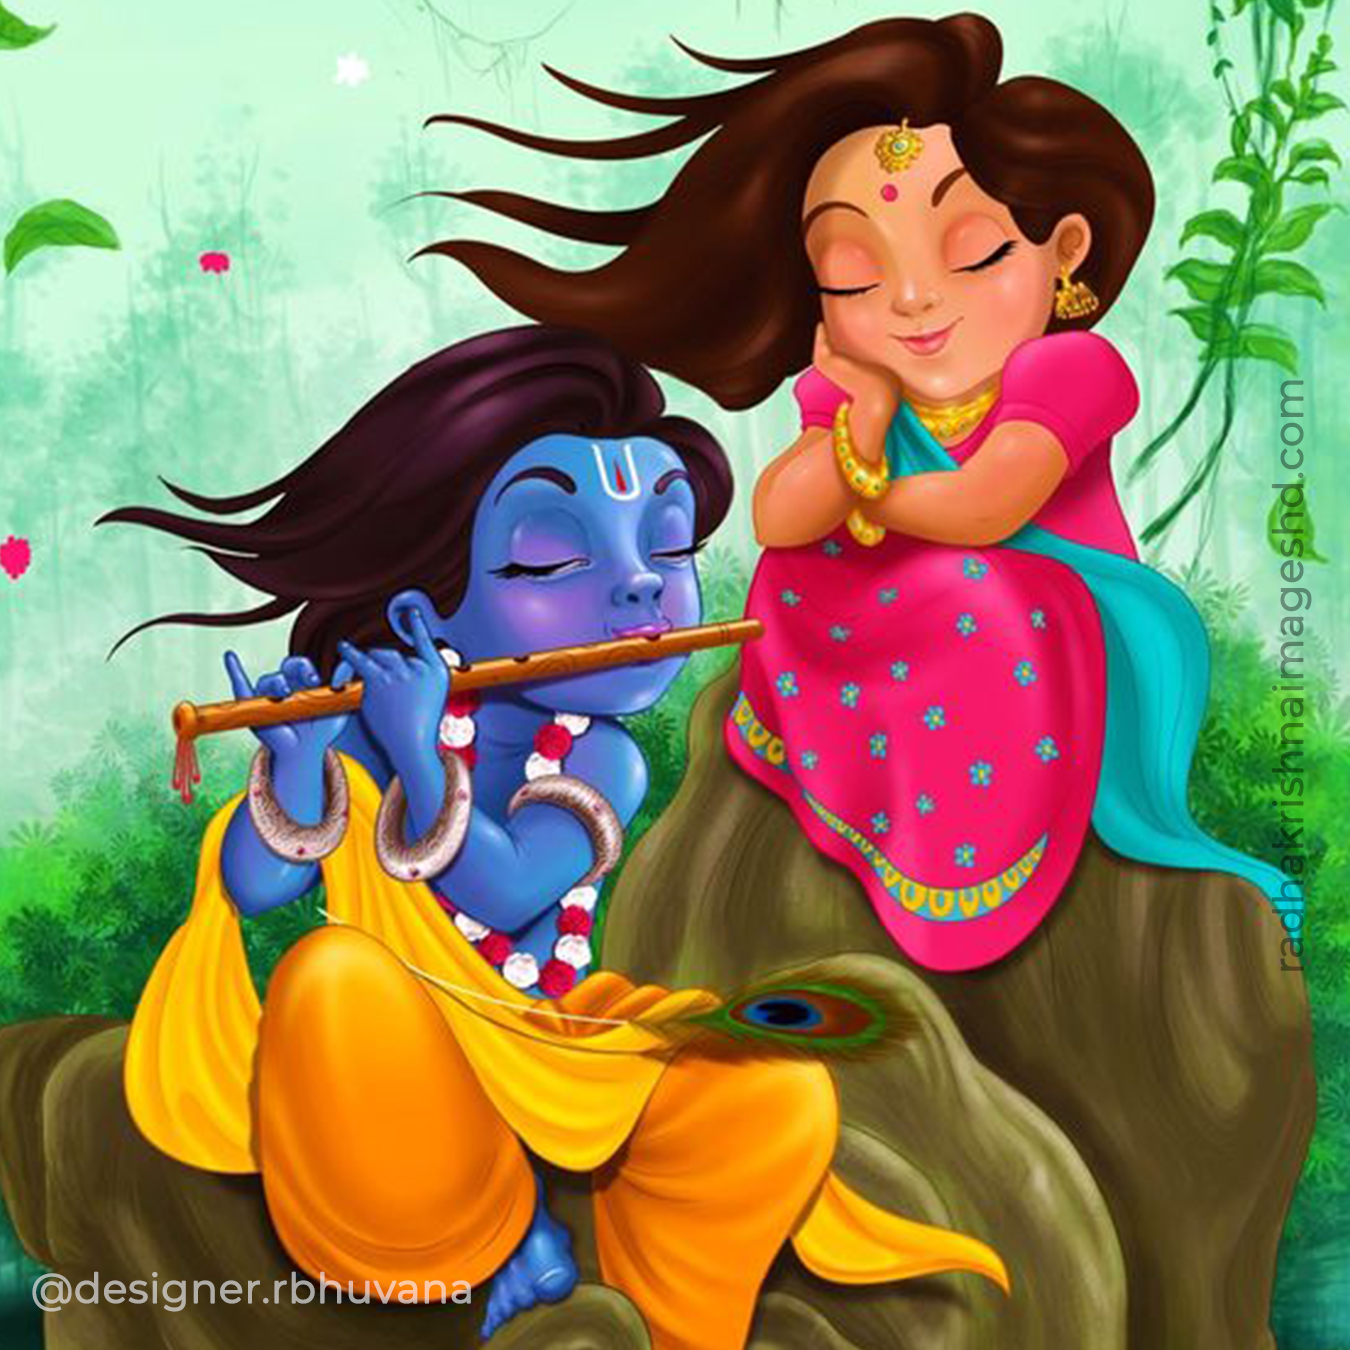 10+ Cute Radha & Krishna Images For Free Download